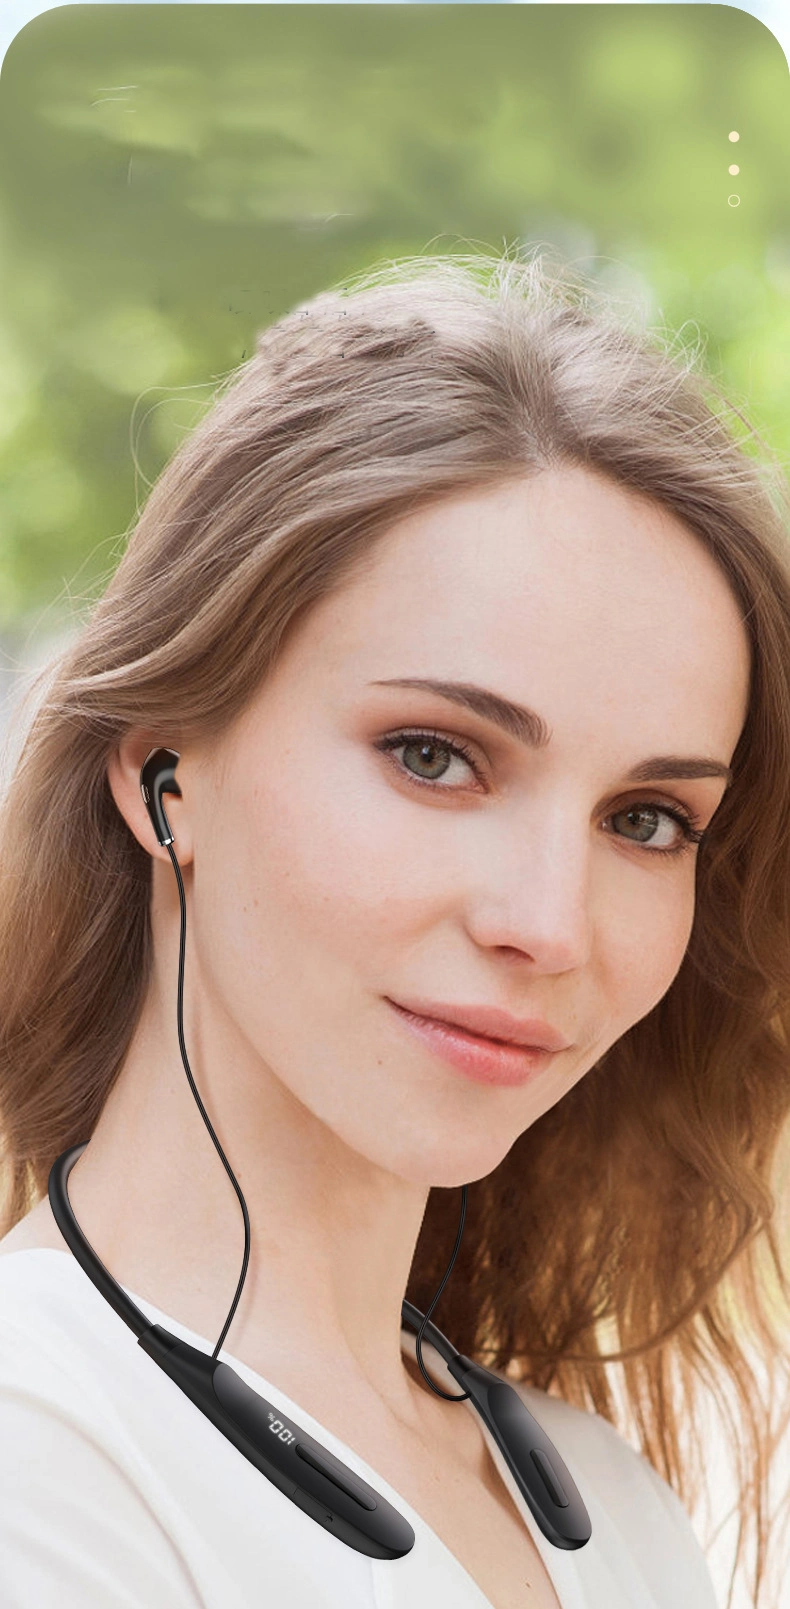 in-Ear Sports Wireless Neck Bluetooth Headset with Digital Display